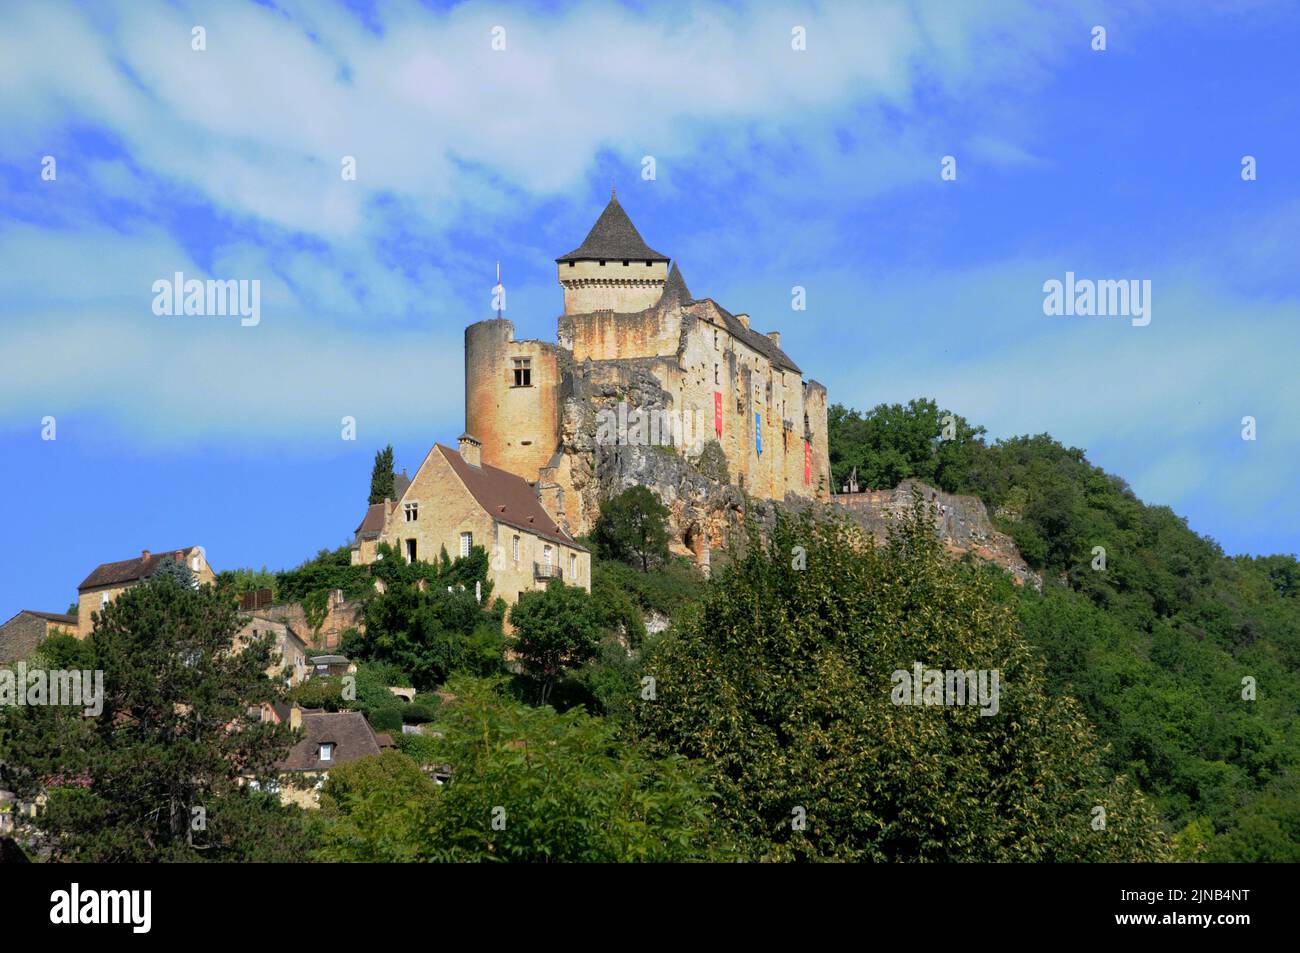 The Chateau de Caslenaud-la-Chapelle overlooks the Dordogne River in the south west of France. It is now privately owned but open to the public. Stock Photo